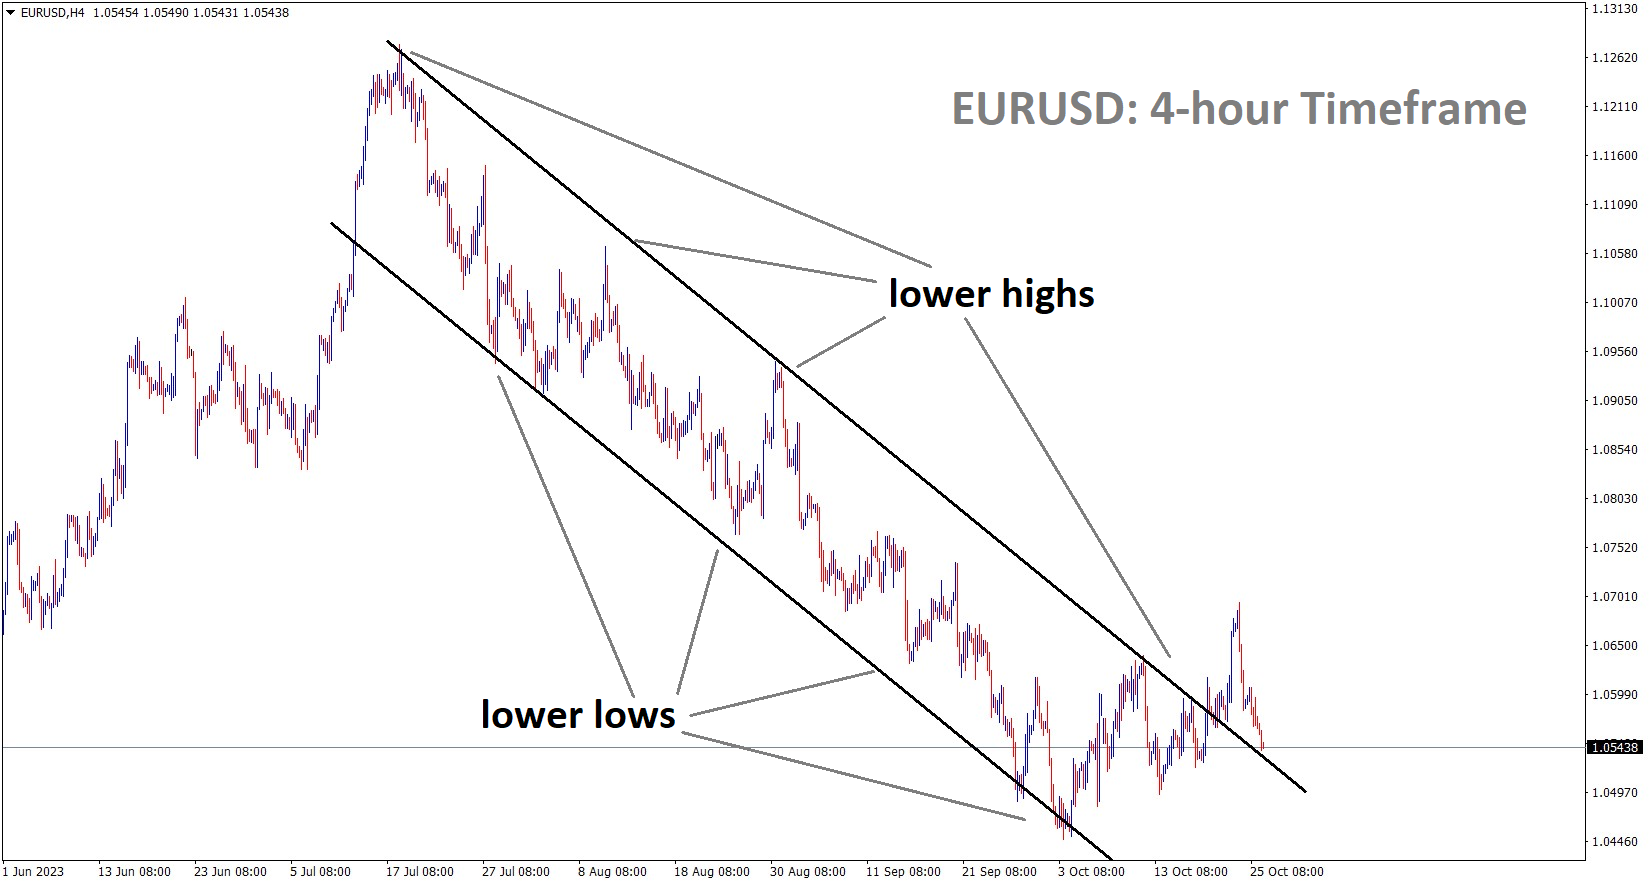 EURUSD is moving in the Descending channel and the market has fallen from the lower high area of the channel